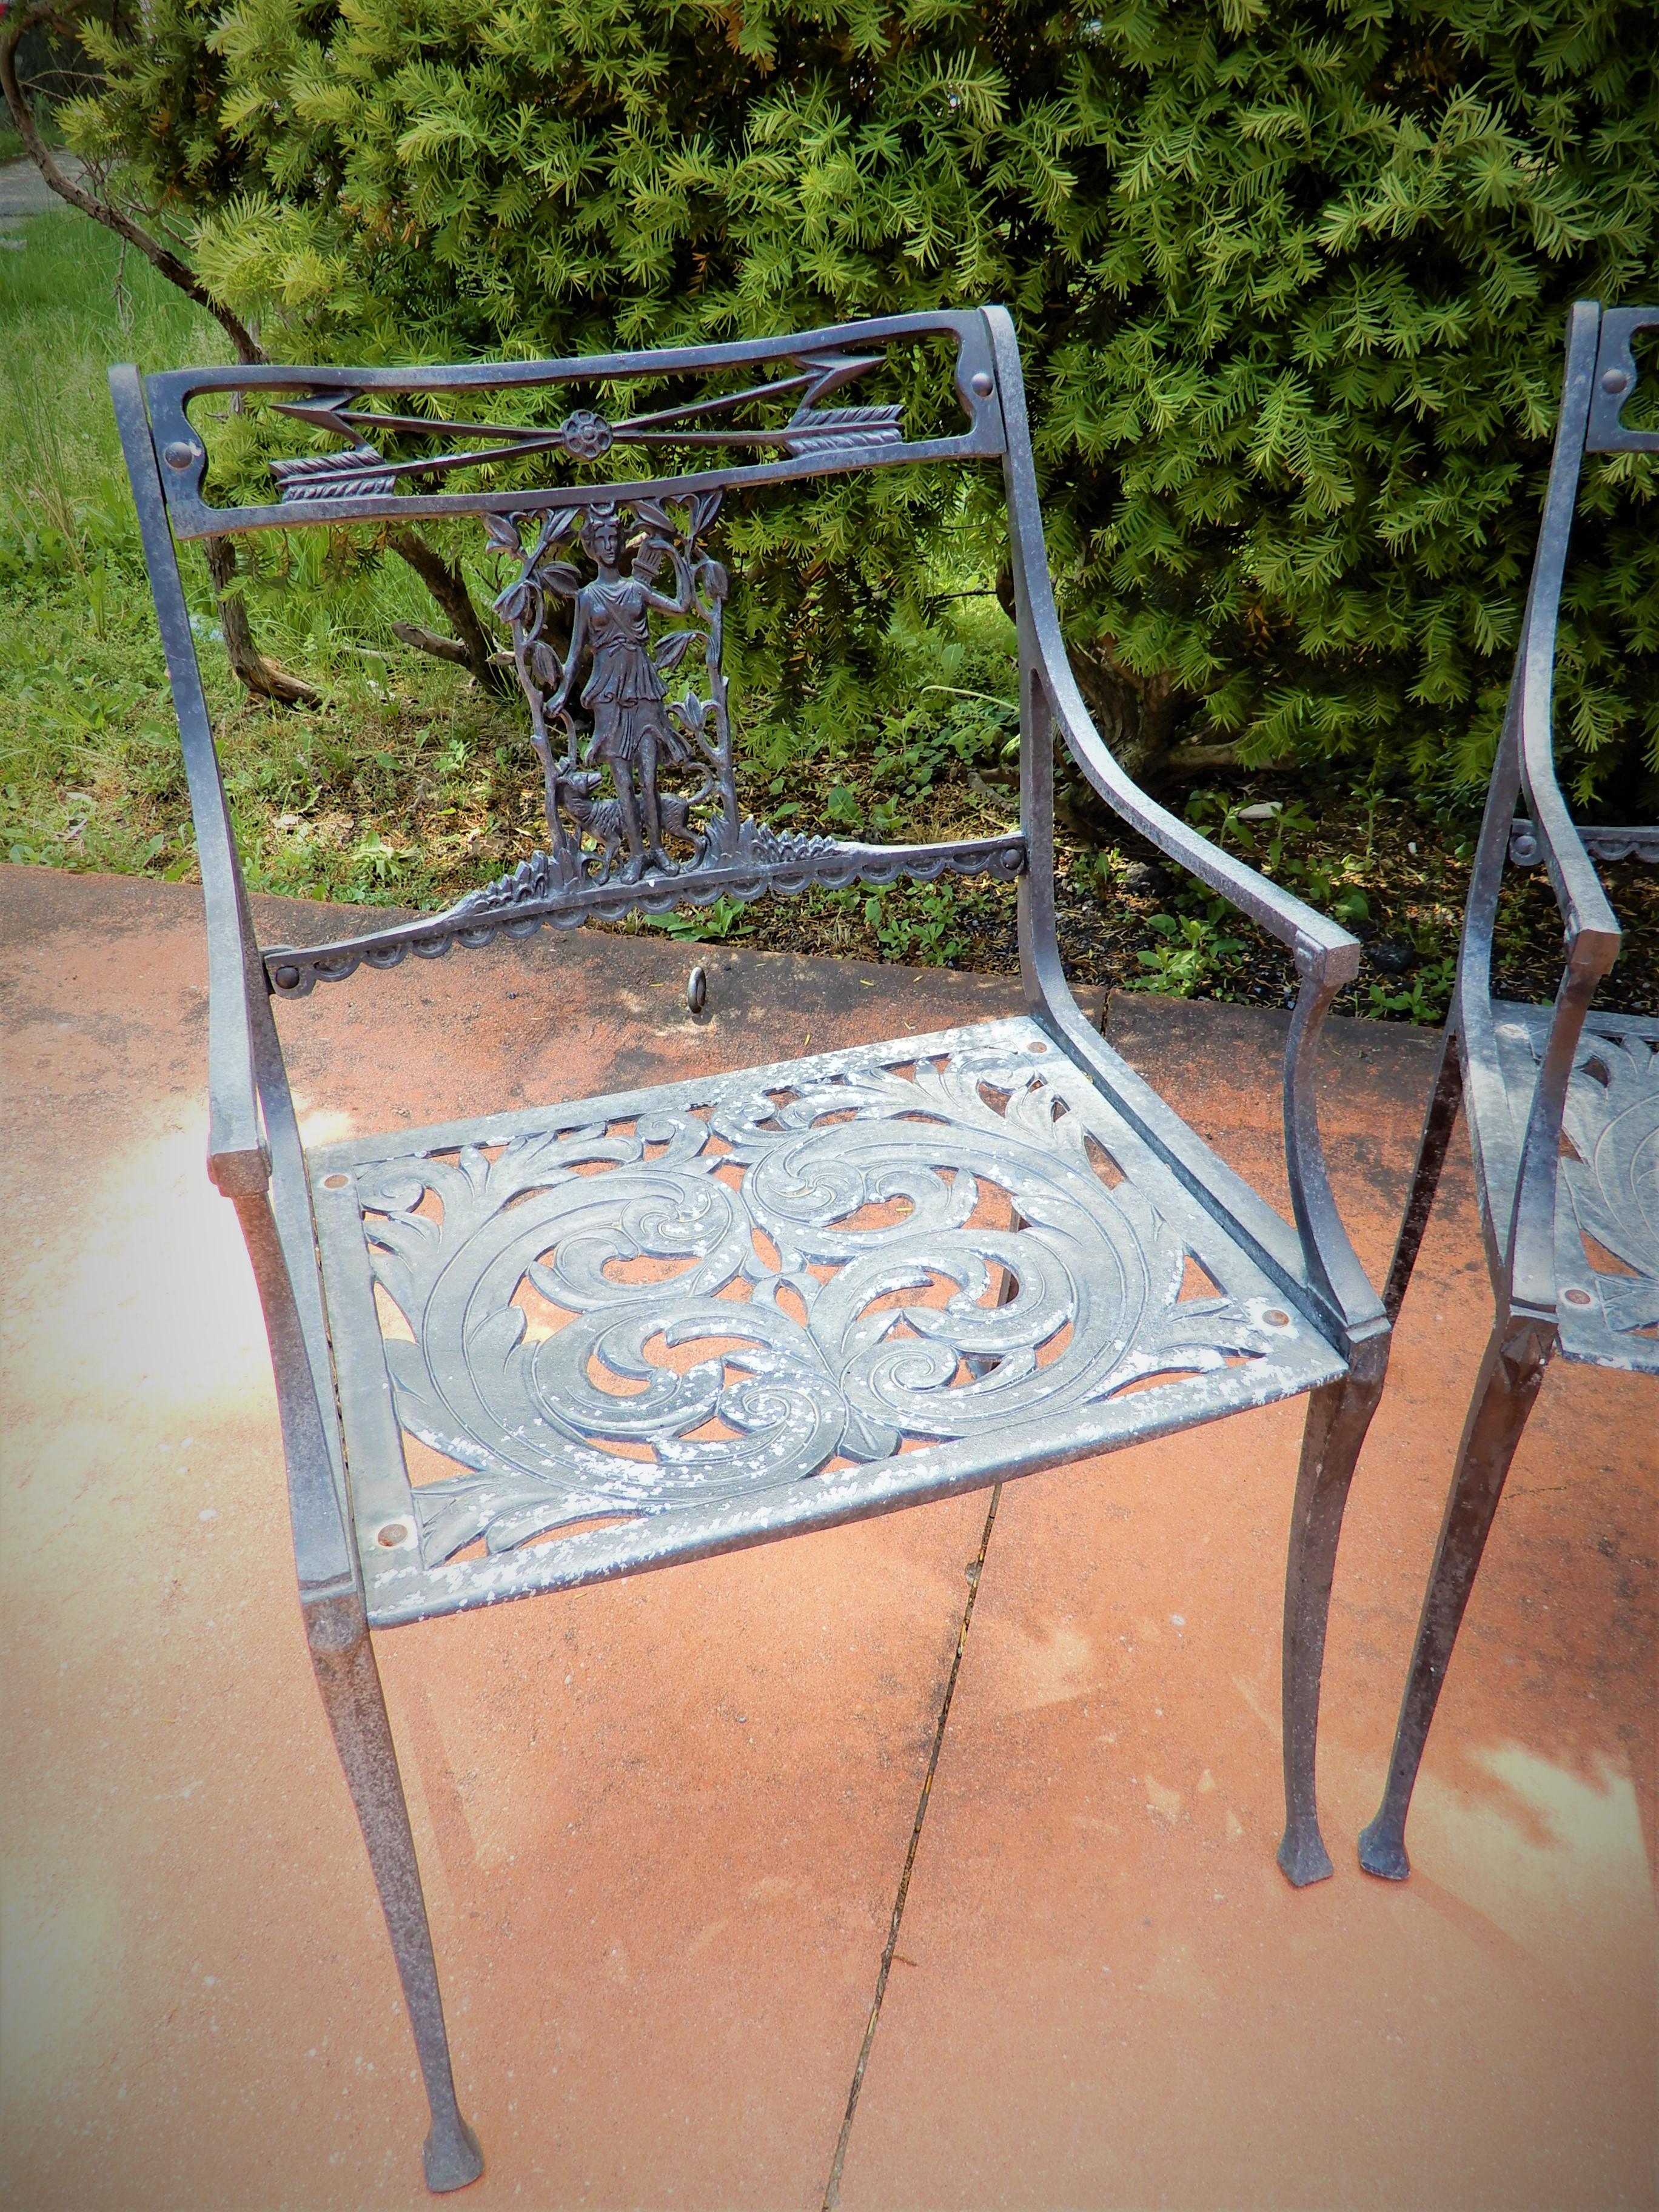 A 3 piece Diana the Huntress bench and 2 armchairs by Molla in cast aluminum. The set is in original condition with paint loss in some areas. the set is comfortable and structurally sound. The bench is 43